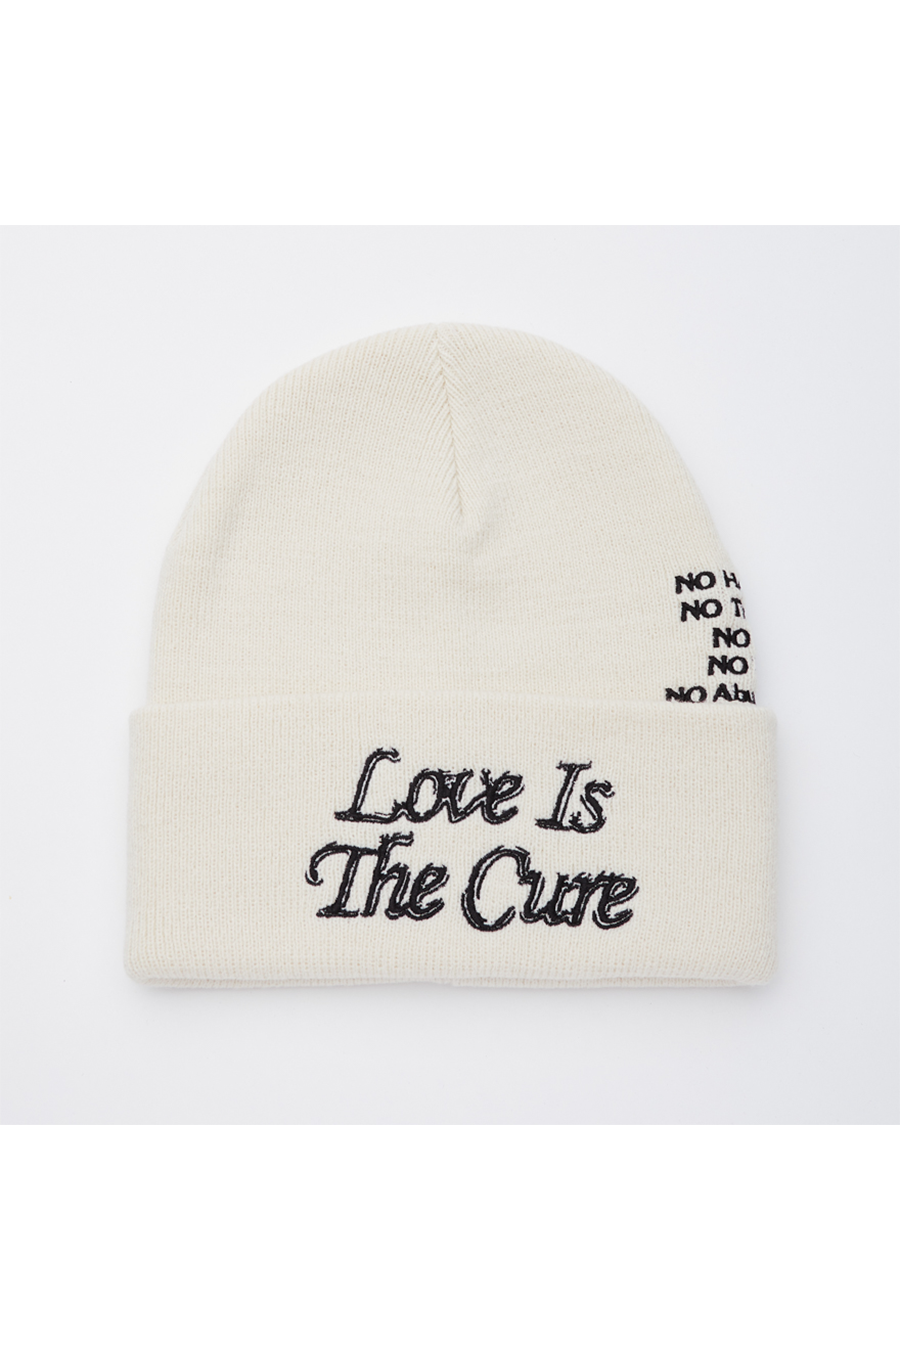 Protest Beanie | Unbleached - Main Image Number 1 of 2